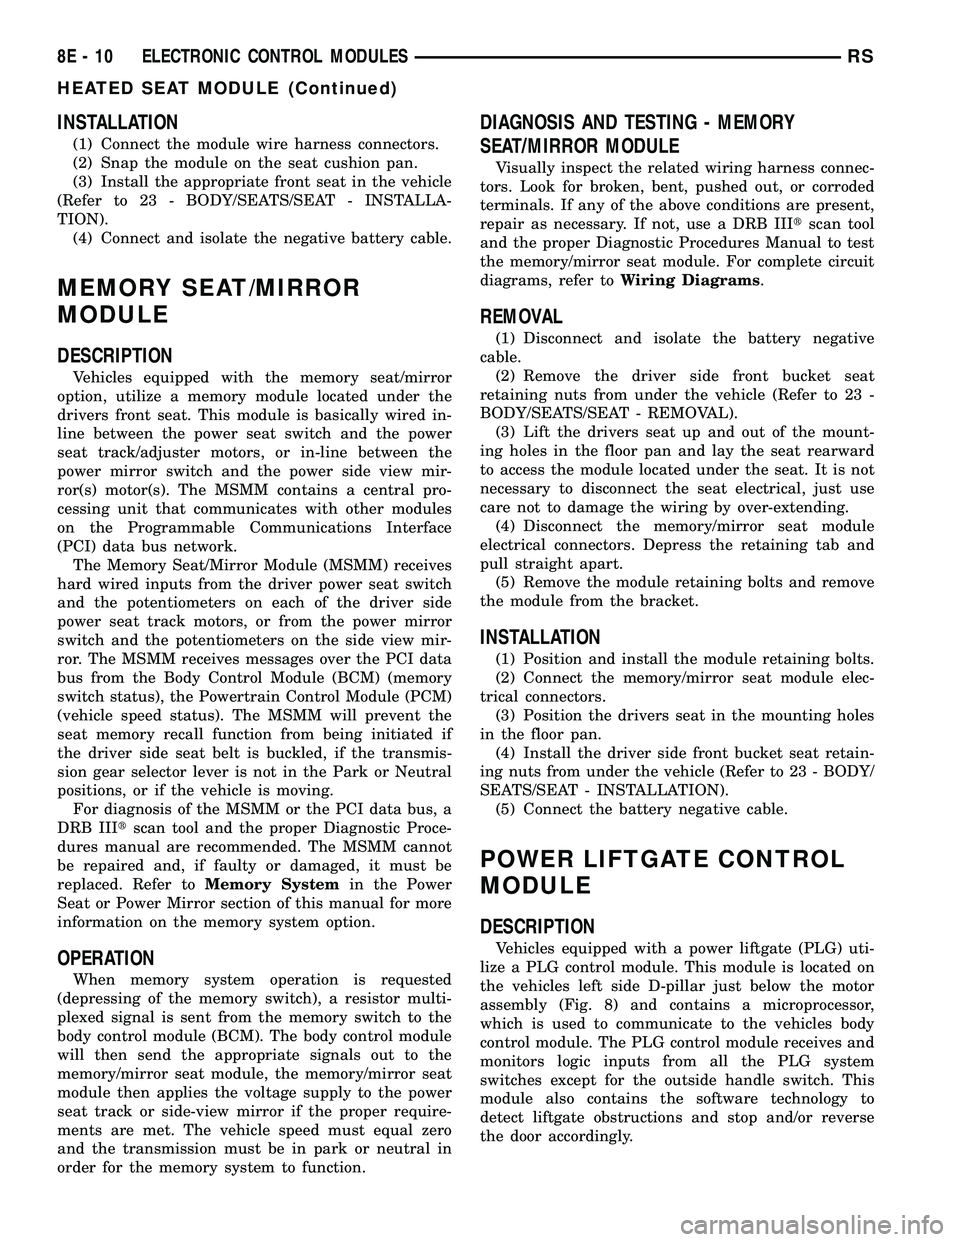 DODGE TOWN AND COUNTRY 2004  Service Manual INSTALLATION
(1) Connect the module wire harness connectors.
(2) Snap the module on the seat cushion pan.
(3) Install the appropriate front seat in the vehicle
(Refer to 23 - BODY/SEATS/SEAT - INSTALL